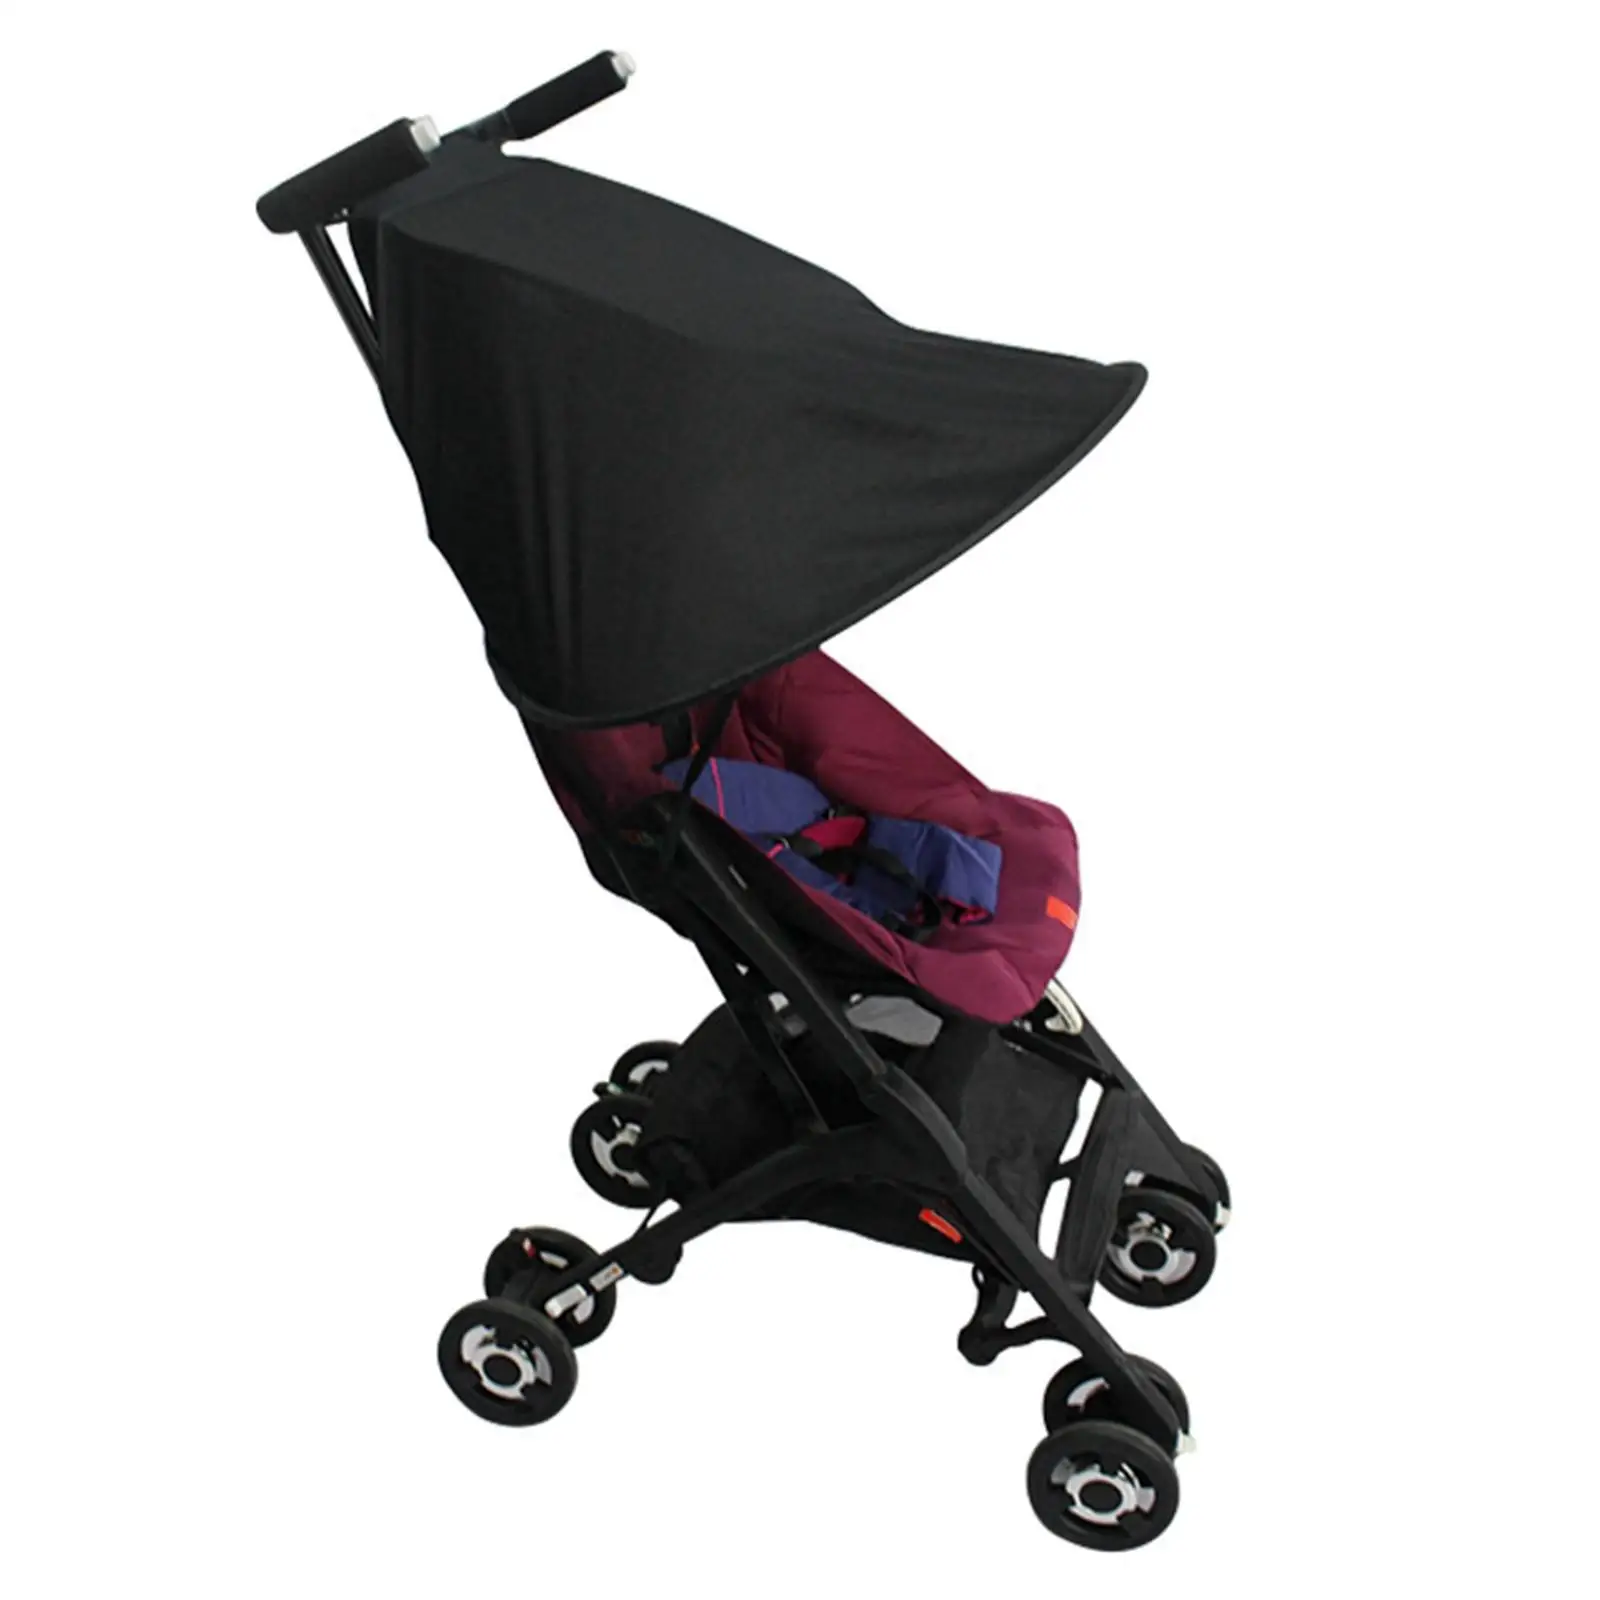 Baby Stroller Sunshade Adjustable Carriage Sun Shade Canopy for Toddlers